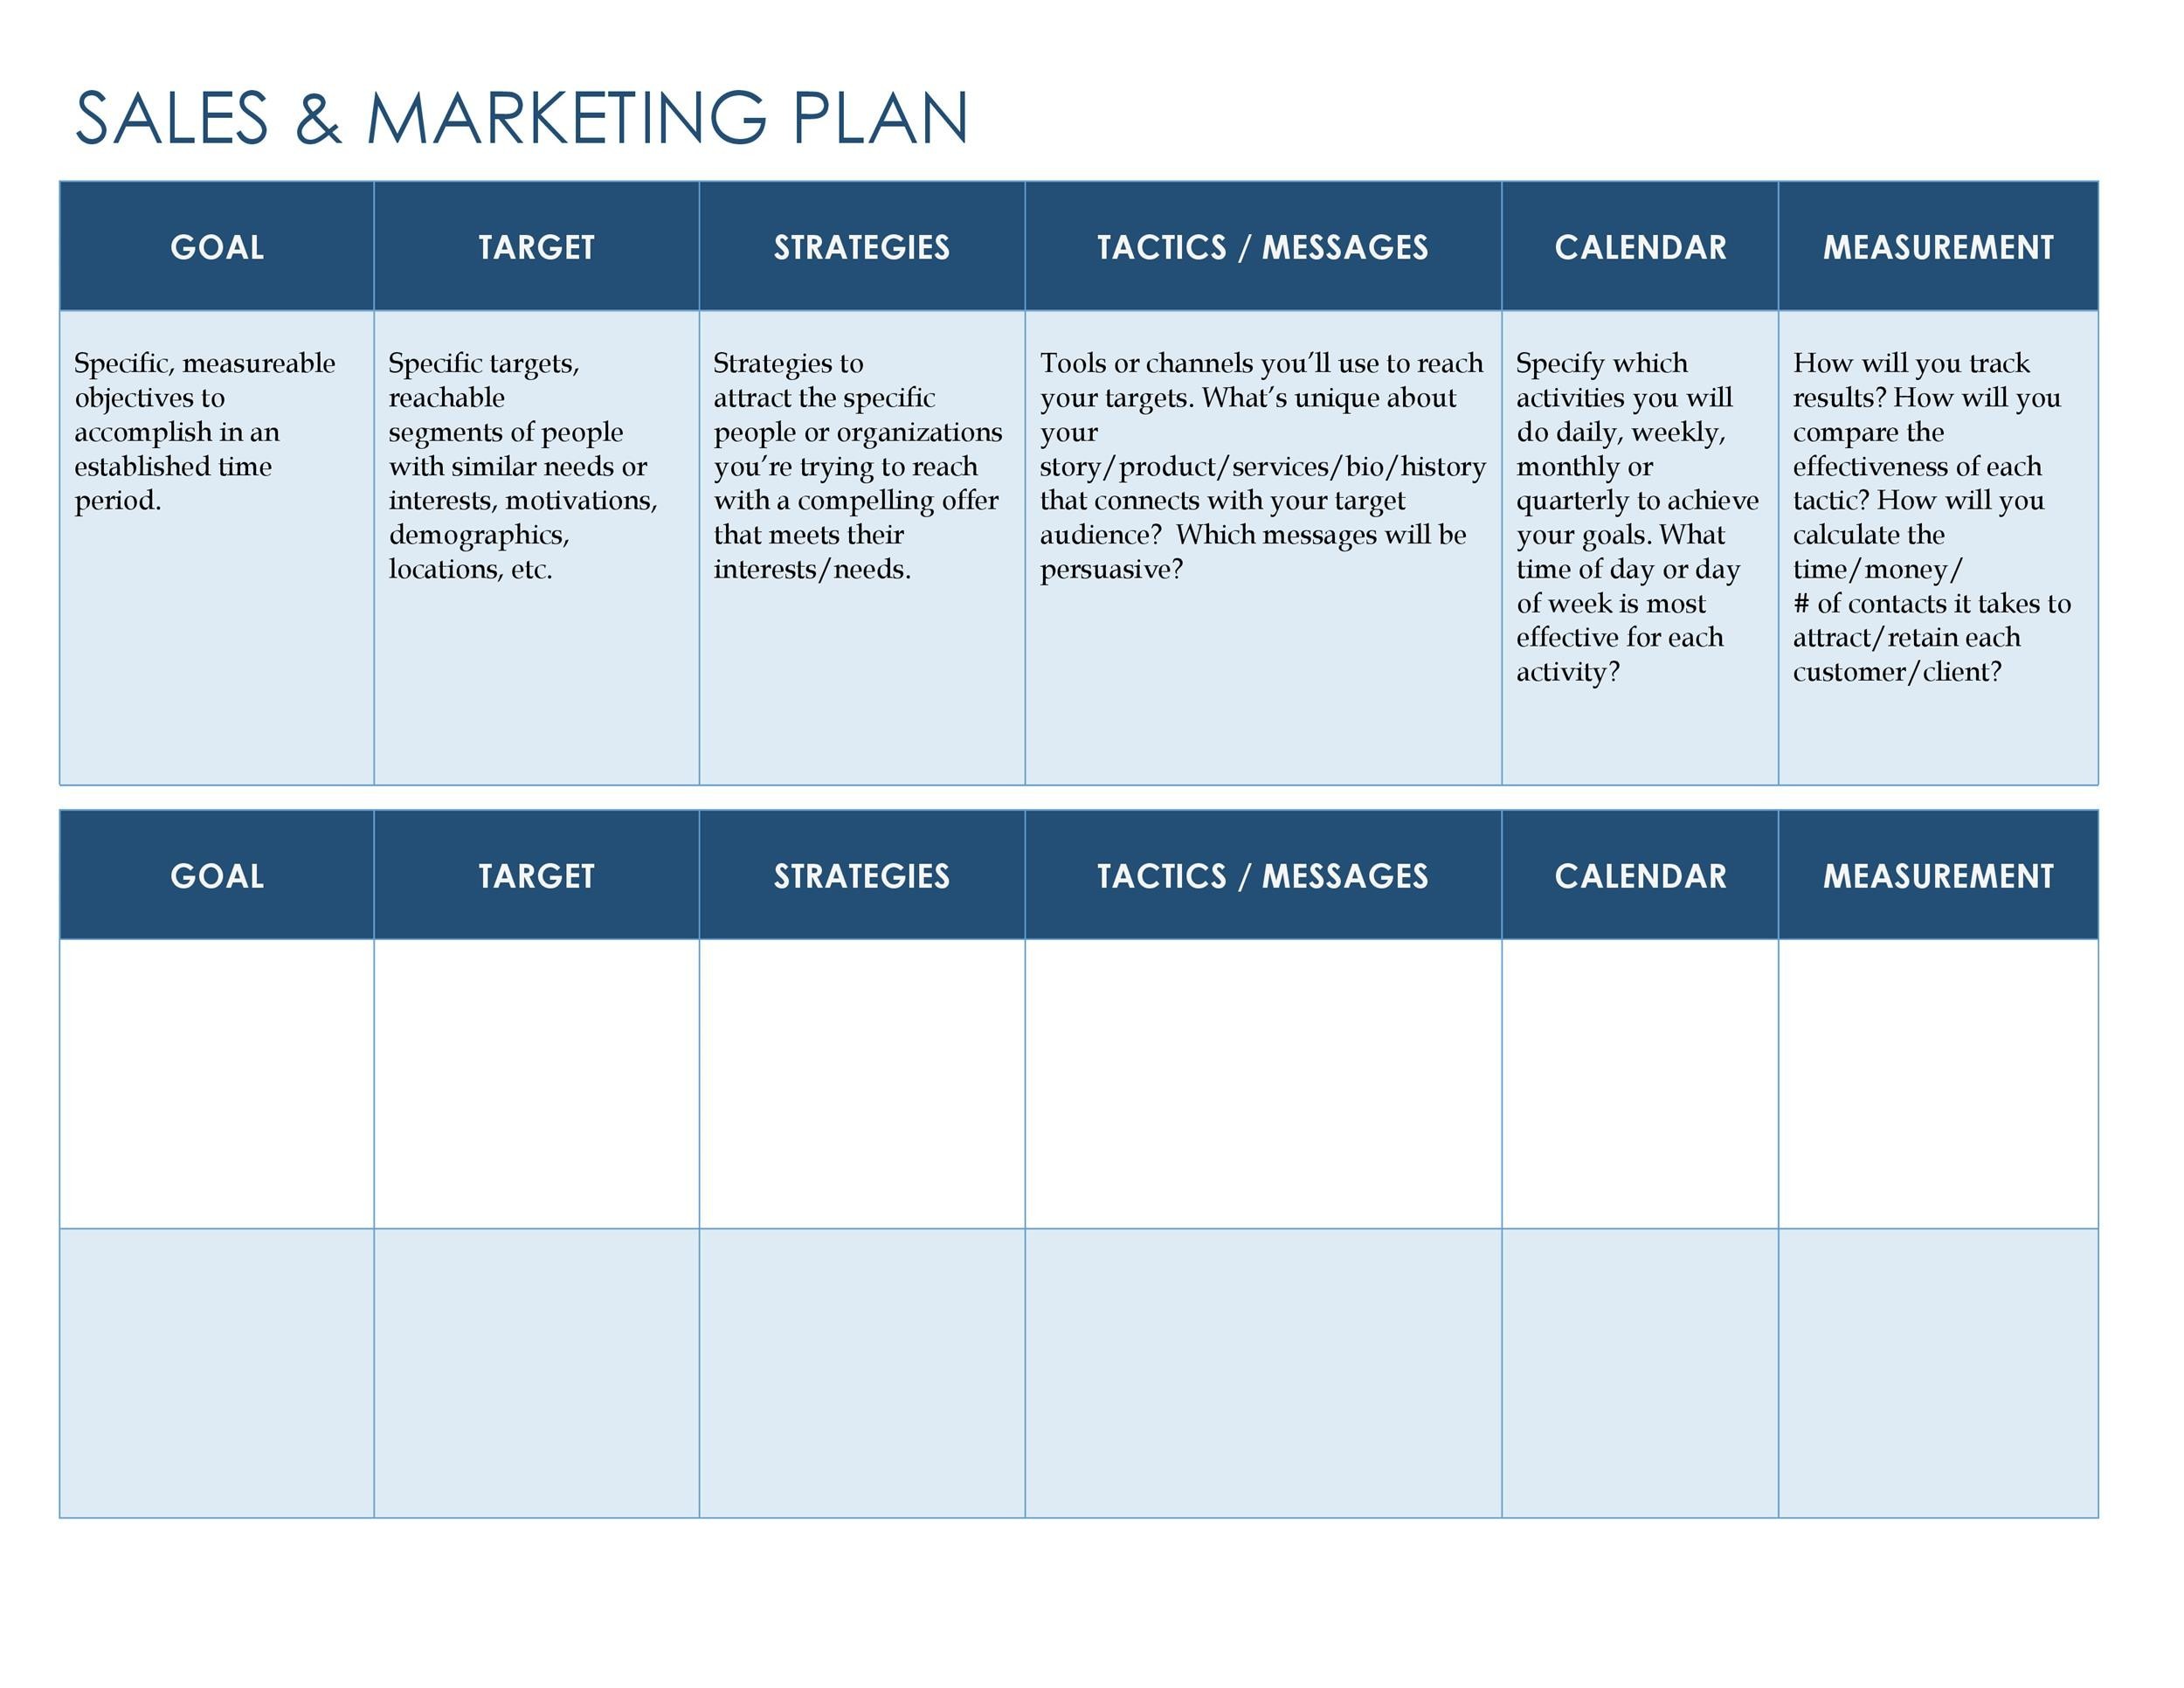 32 Sales Plan & Sales Strategy Templates [Word & Excel]